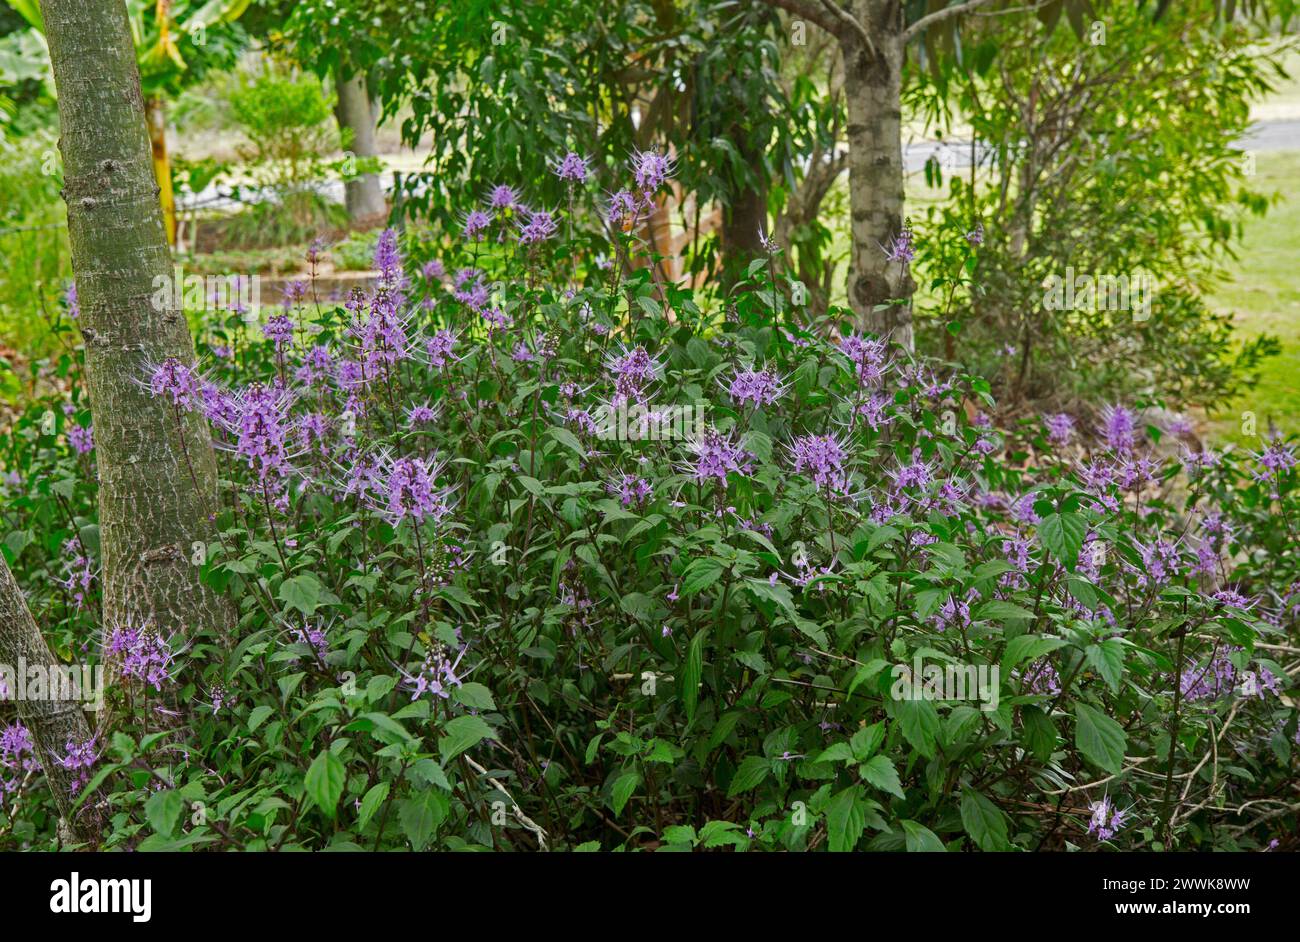 Australian native perennial plant, Orthosiphon aristatus, Cat's Whiskers, with mauve / pink flowers, growing among trees in a garden Stock Photo